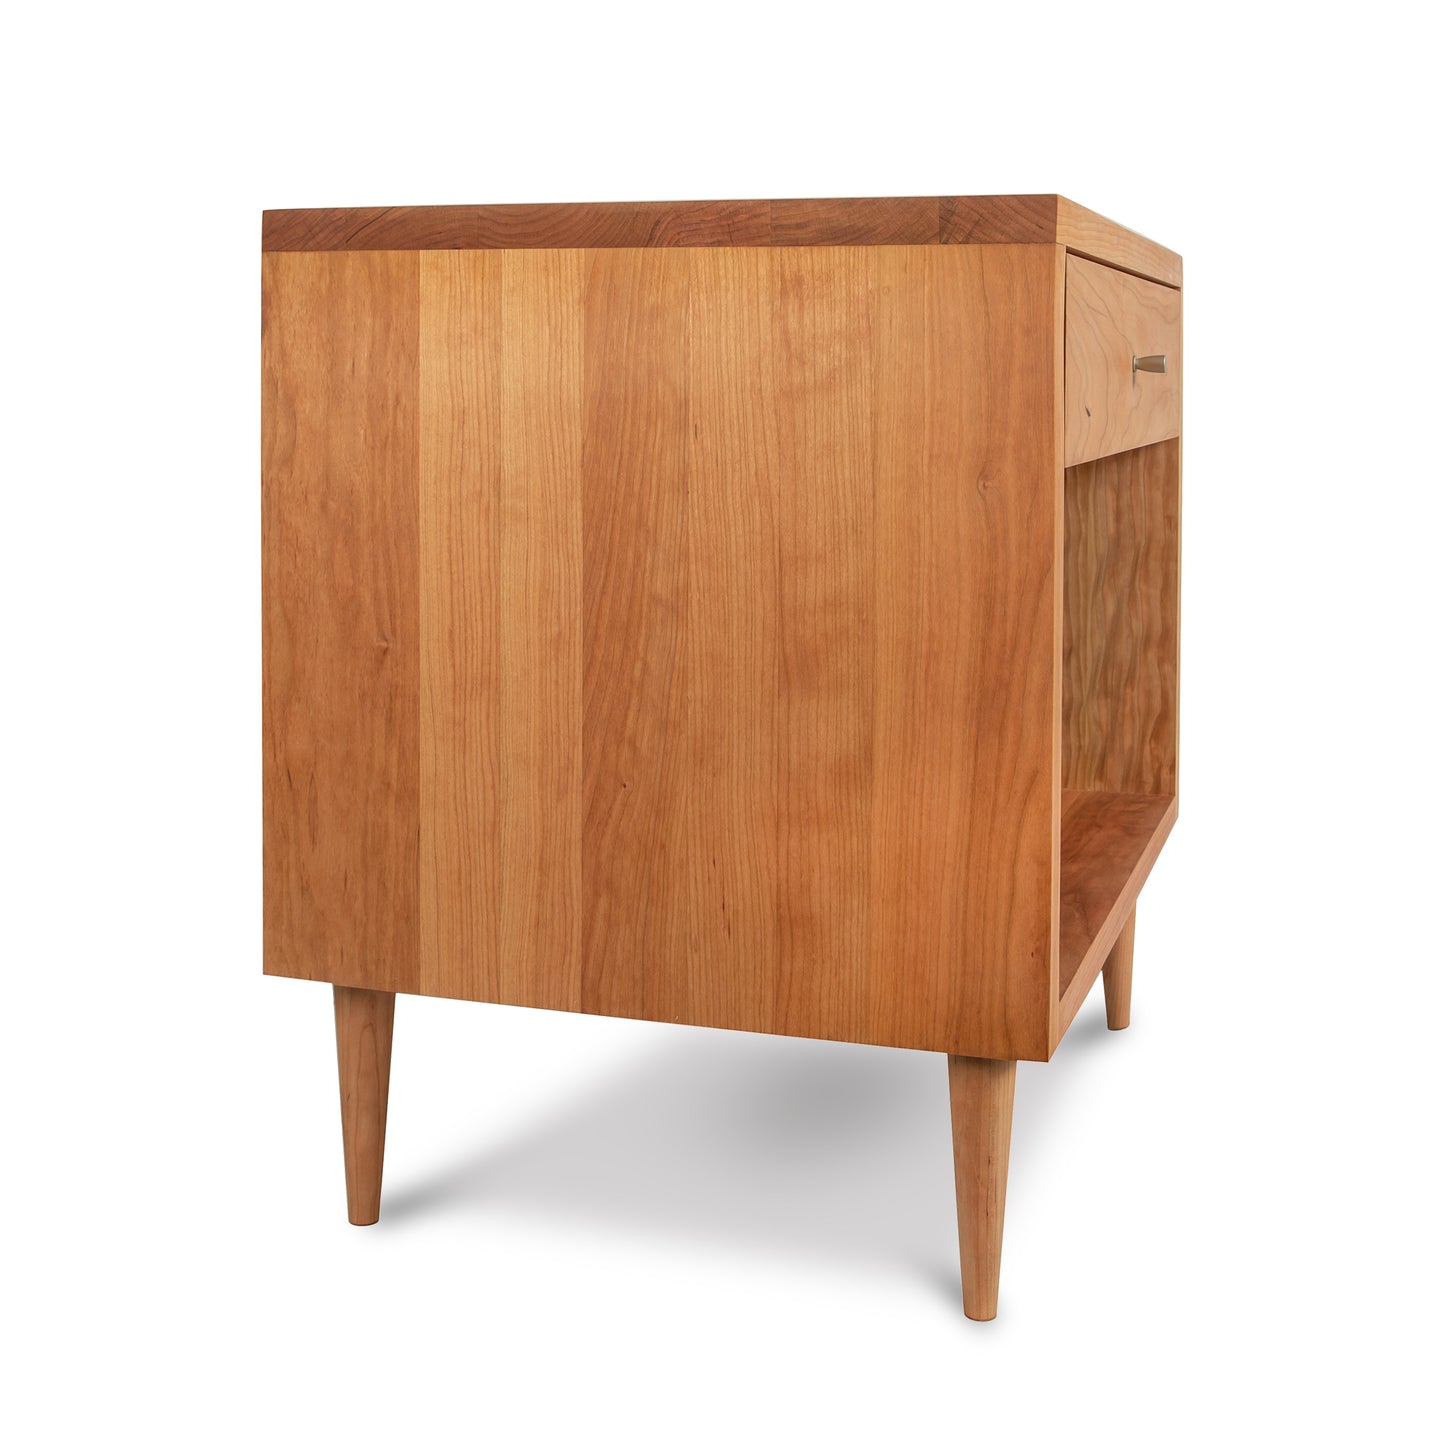 A Vermont Furniture Designs Larssen 1-Drawer Wide Nightstand in natural hardwood with tapered legs, isolated on a white background.